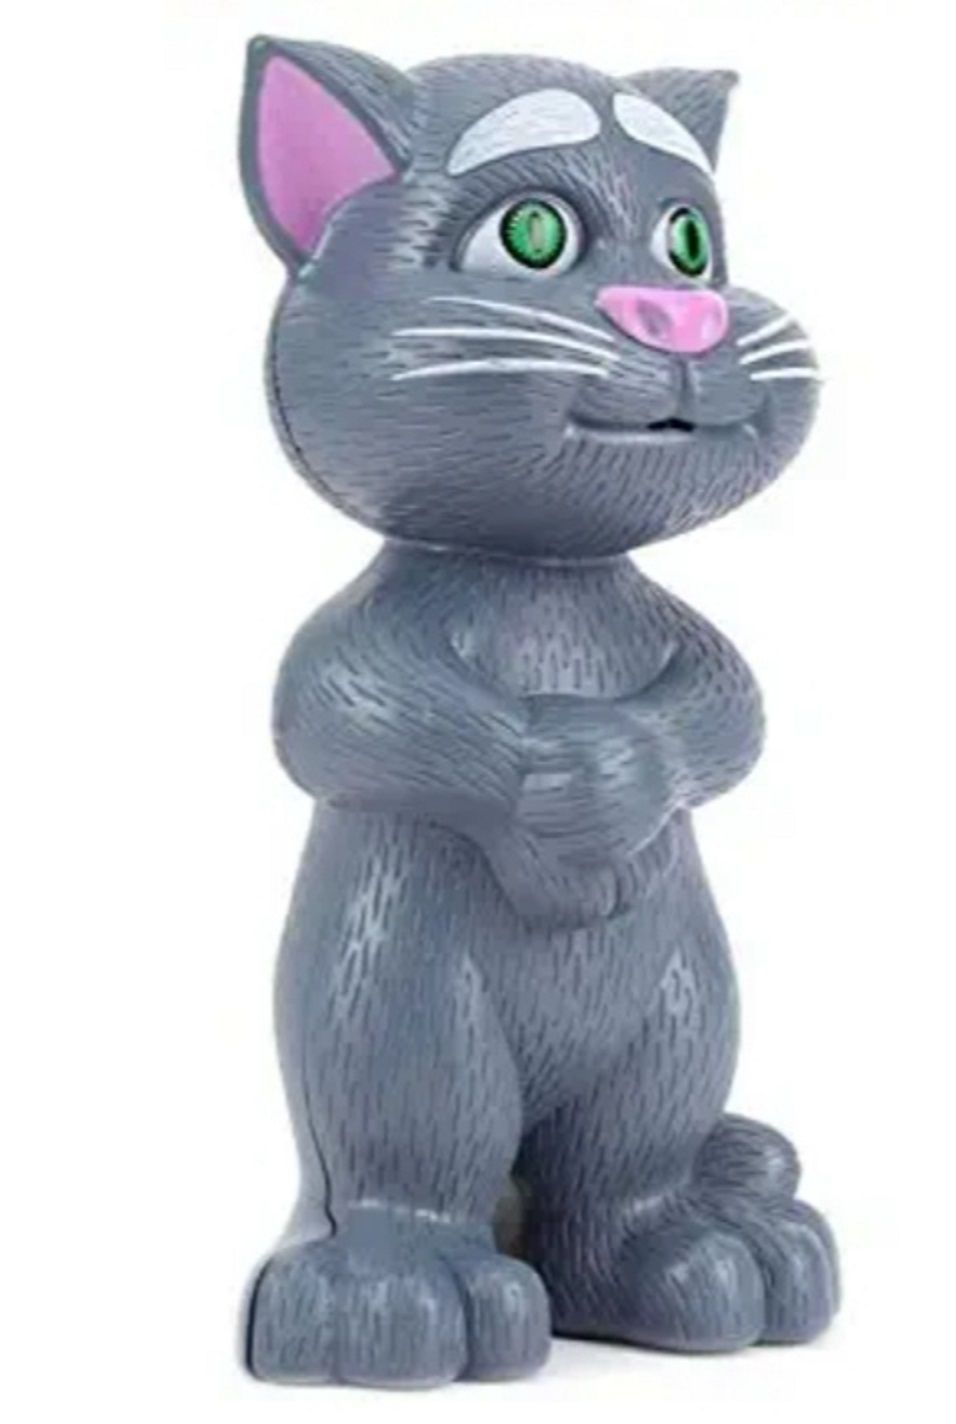     			2405 YESKART-GREY Talking Tom Cat Toy for Kids with Songs and Stories in Funny Tone (Talking Cat),GREY